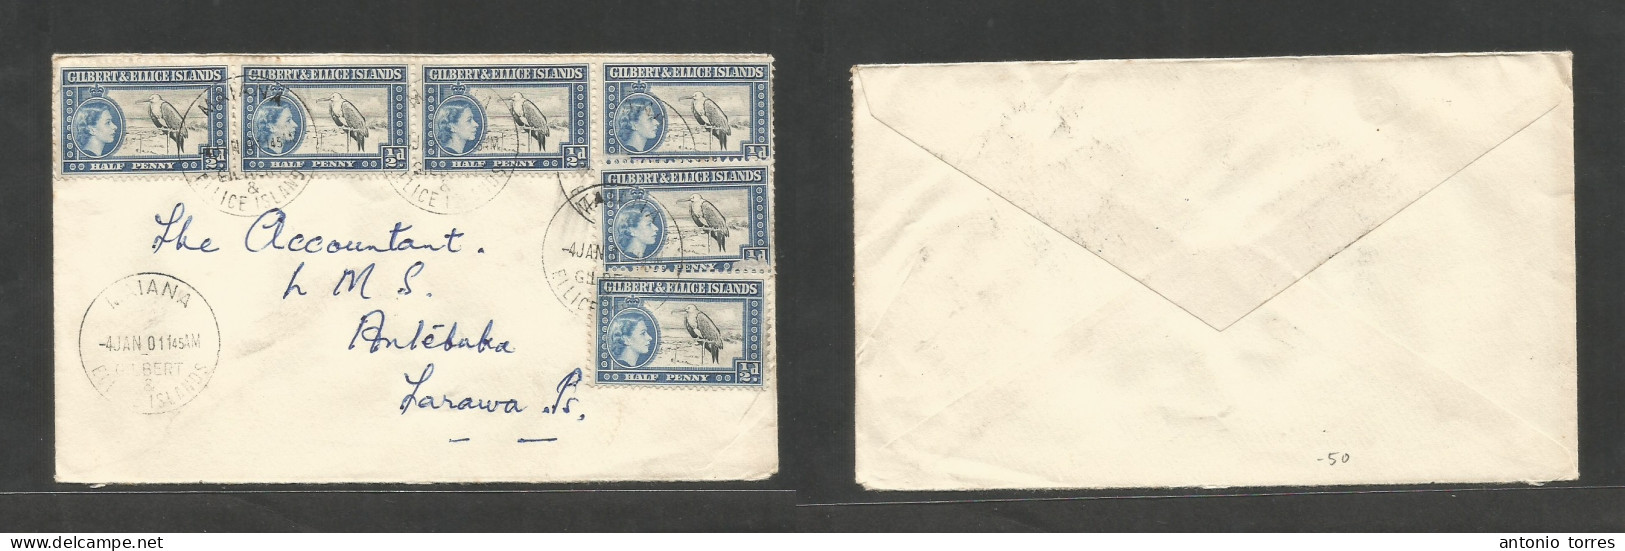 Bc - Gilbert & Ellice Is.. C. 1960 (4 Jan) Maiana - Antebaba, Sarawa Is. Multifkd Inter Island Mail, Scarce Mail Usage. - Other & Unclassified